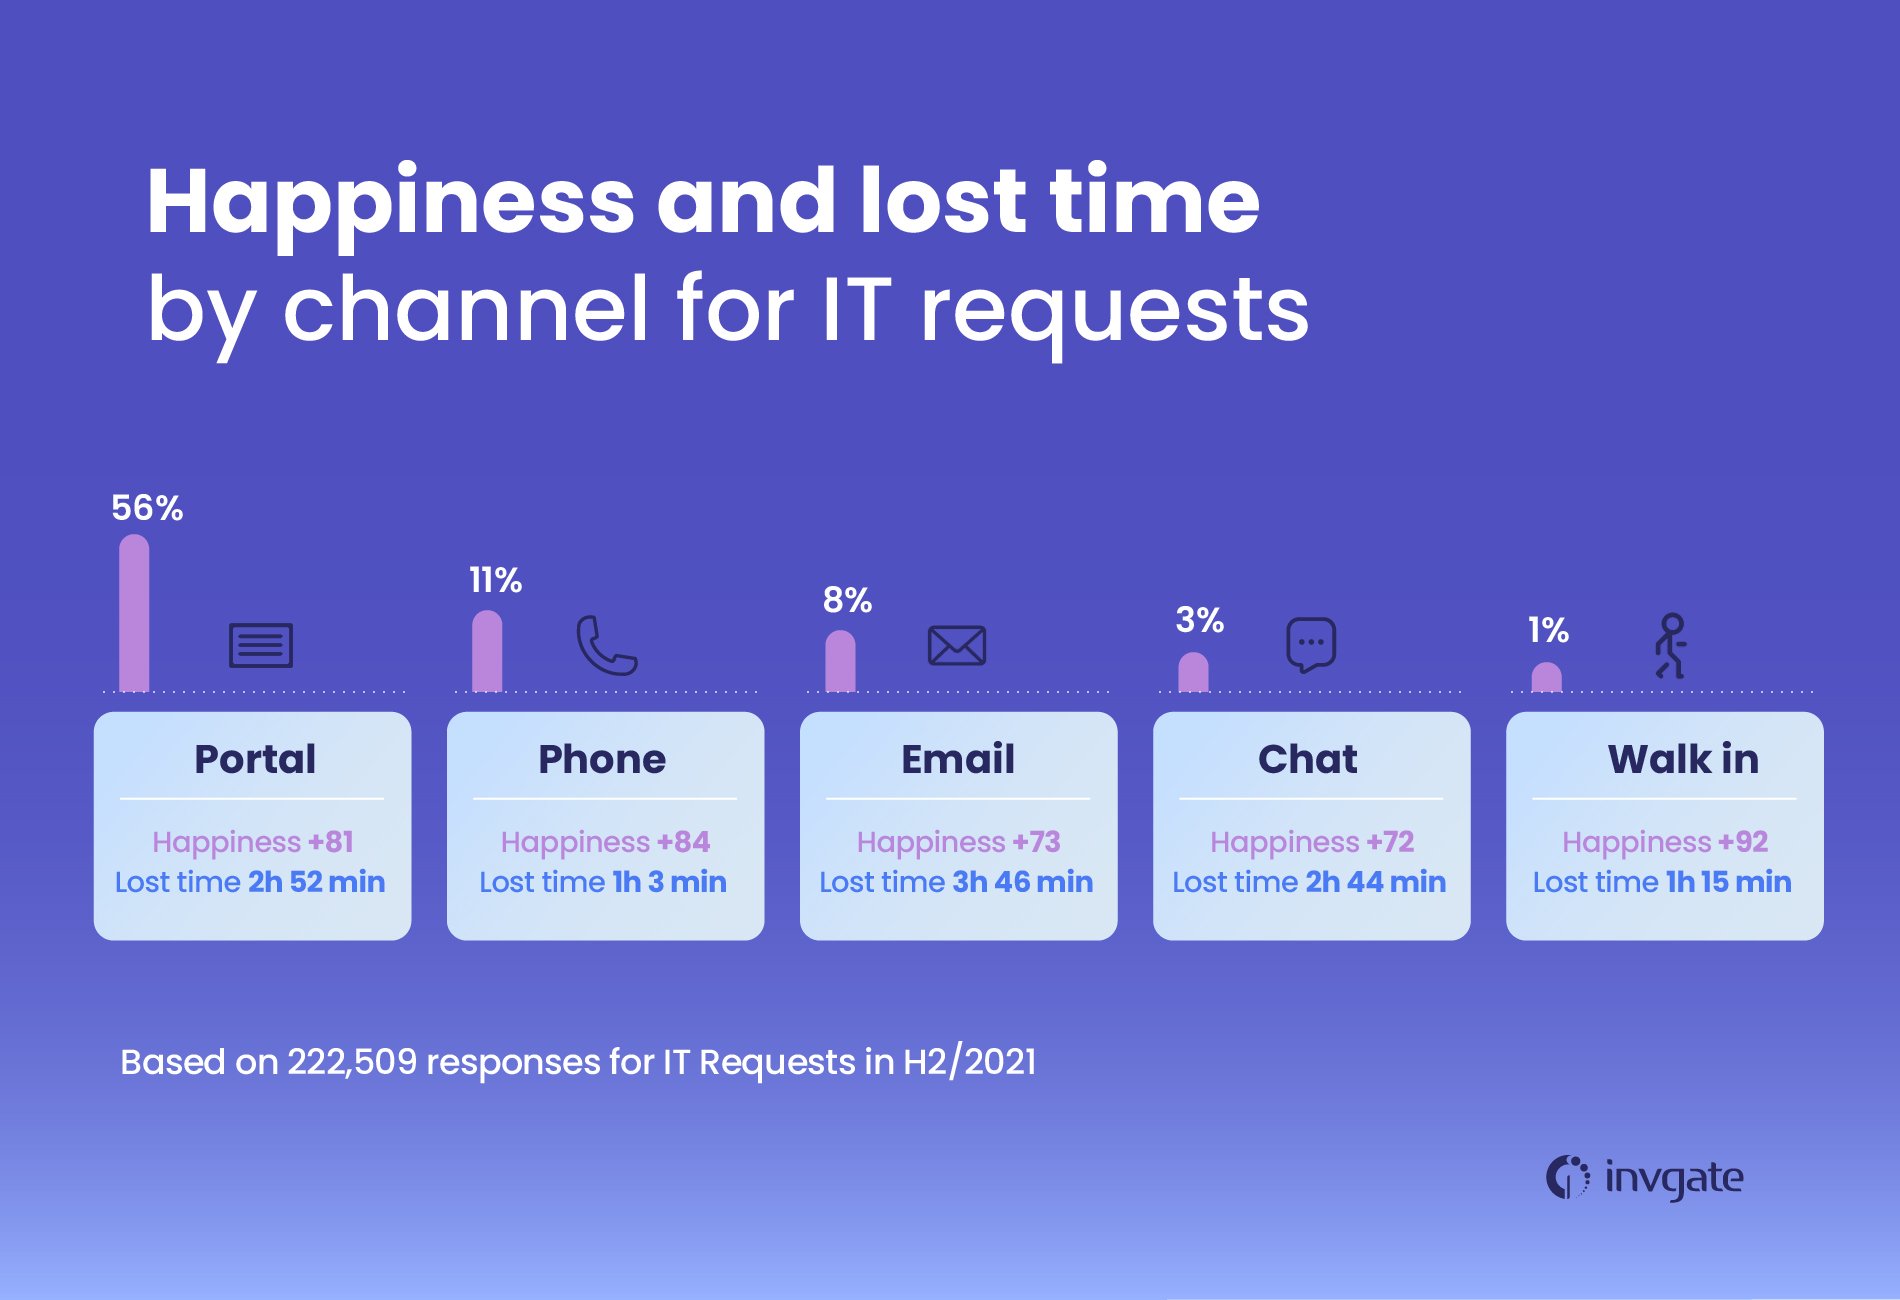 Metrics on happiness and lost time by channel for IT requests, based on HappySignals' customer experience benchmarking report.